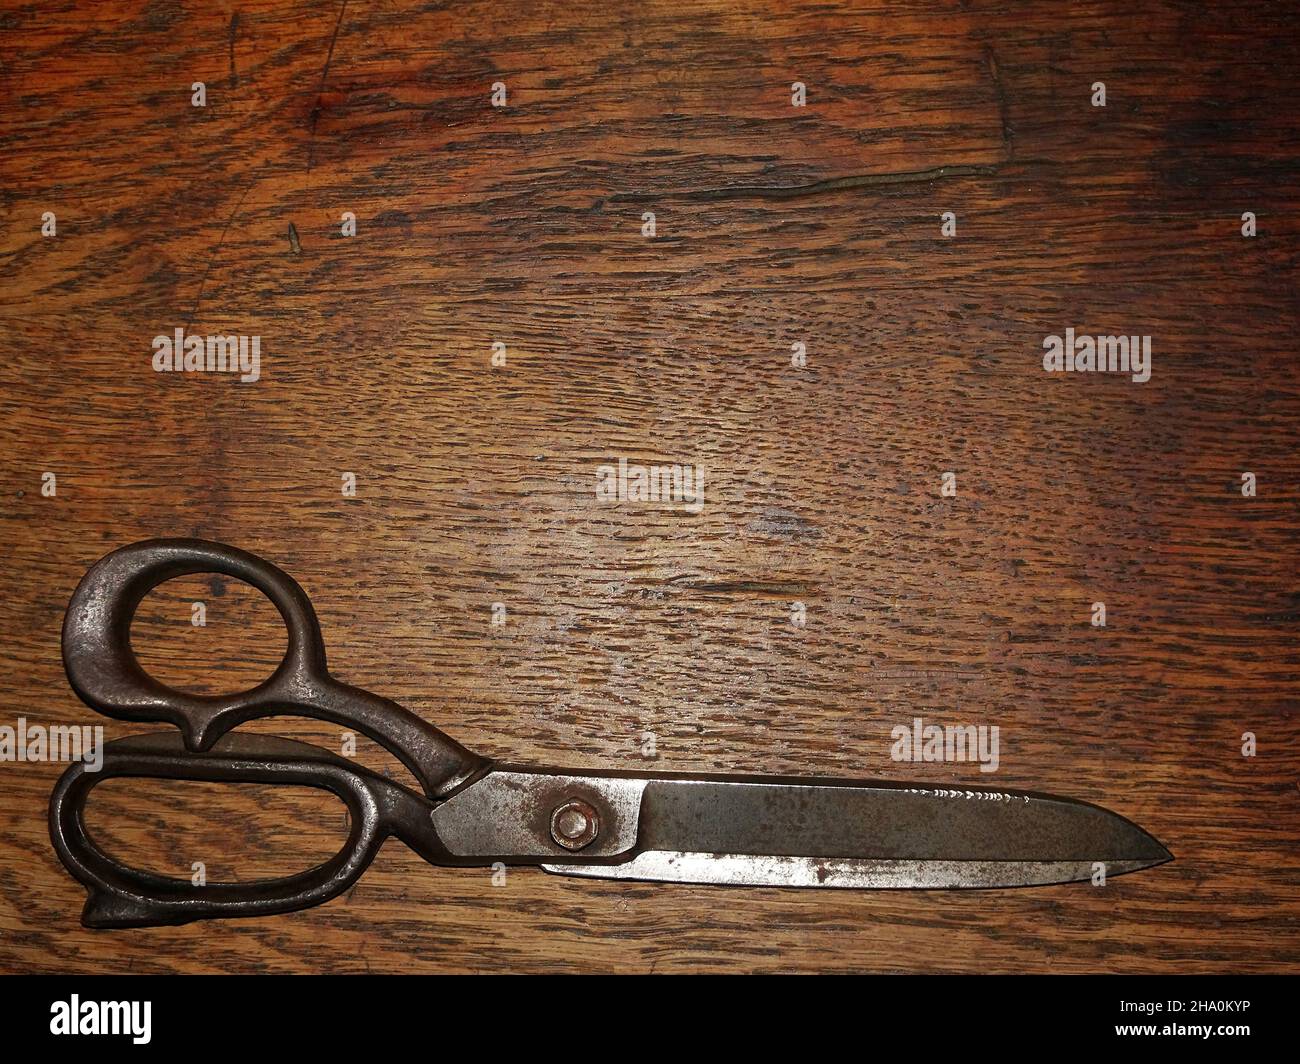 Old tailors scissors on wooden background Stock Photo